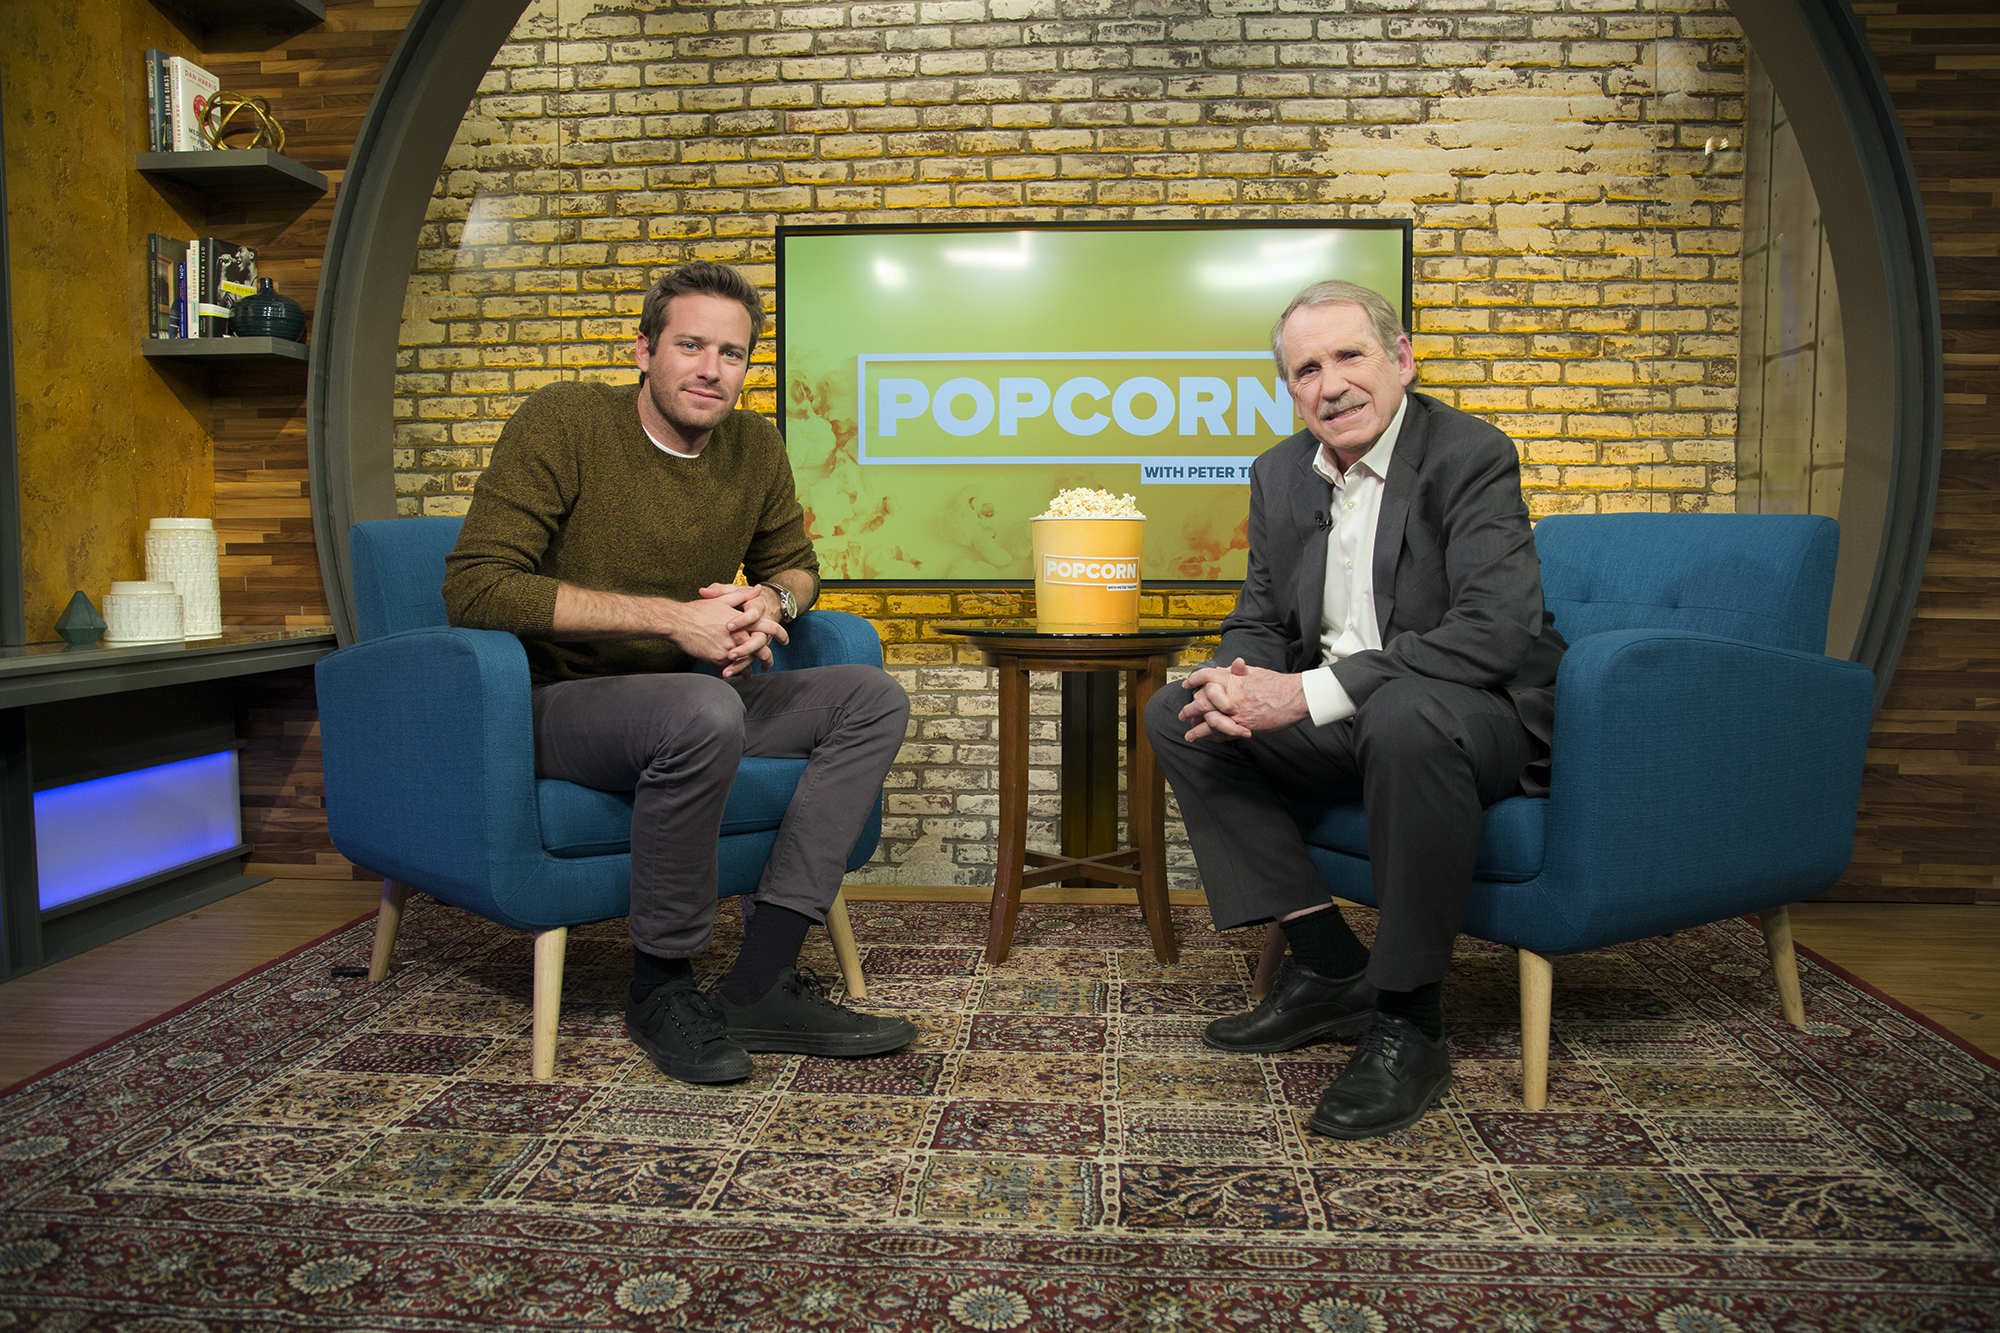 PHOTO: Armie Hammer appears on "Popcorn with Peter Travers" at ABC News studios, Jan. 3, 2018, in New York City.